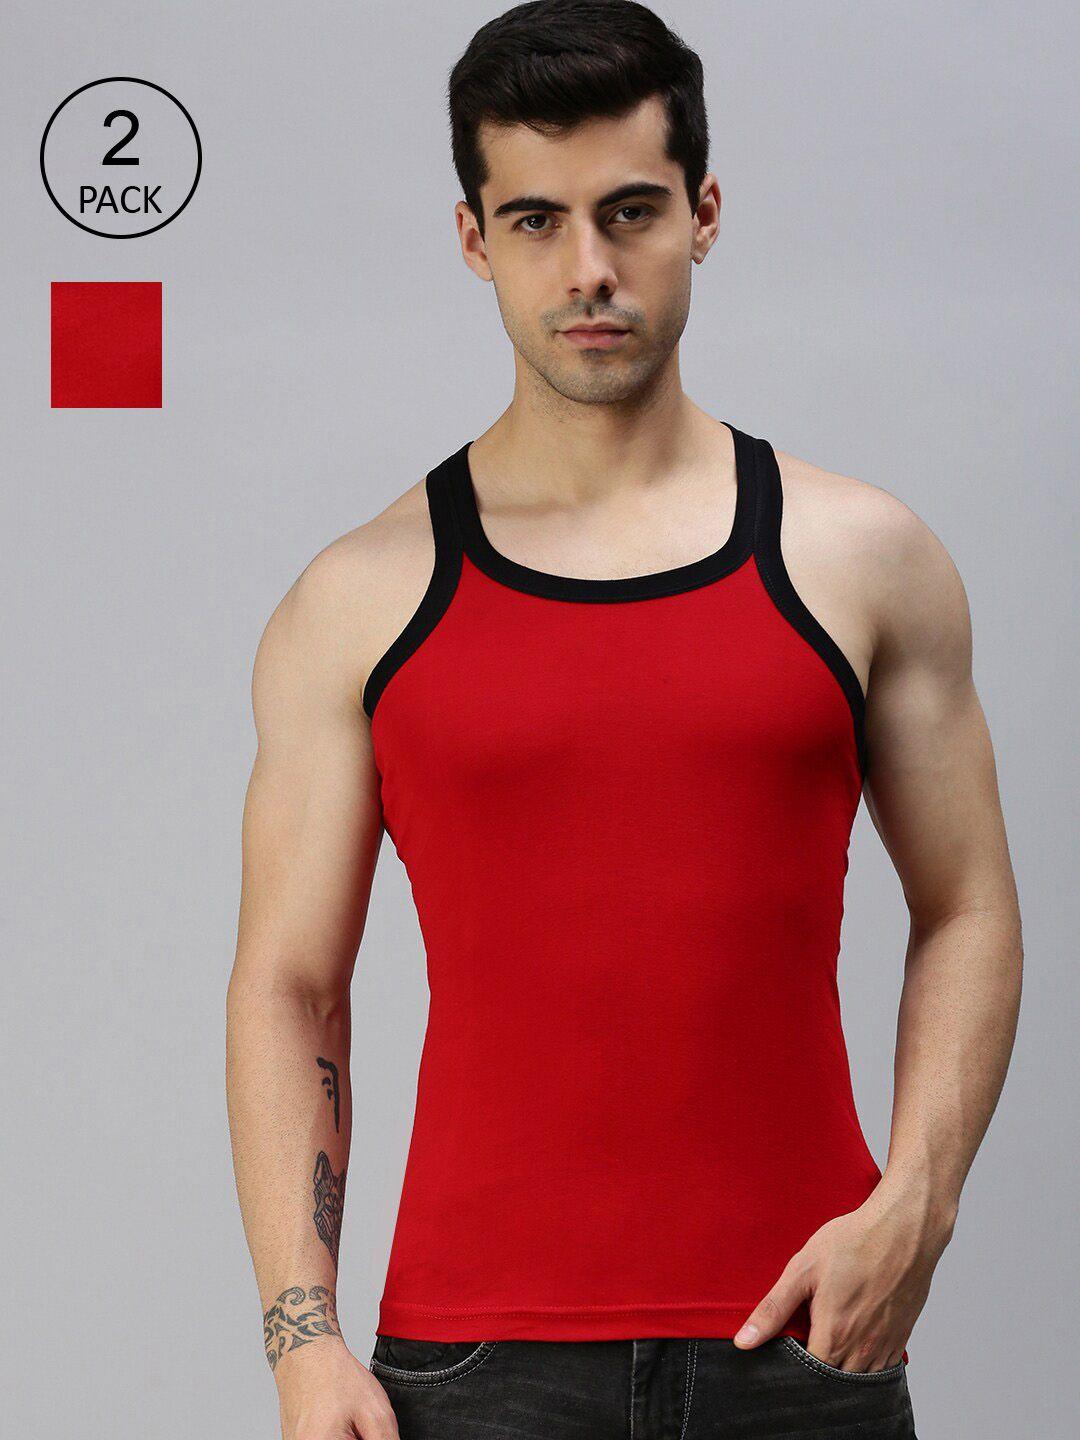 lux-cozi-men-pack-of-2-red-solid-organic-cotton-innerwear-vests